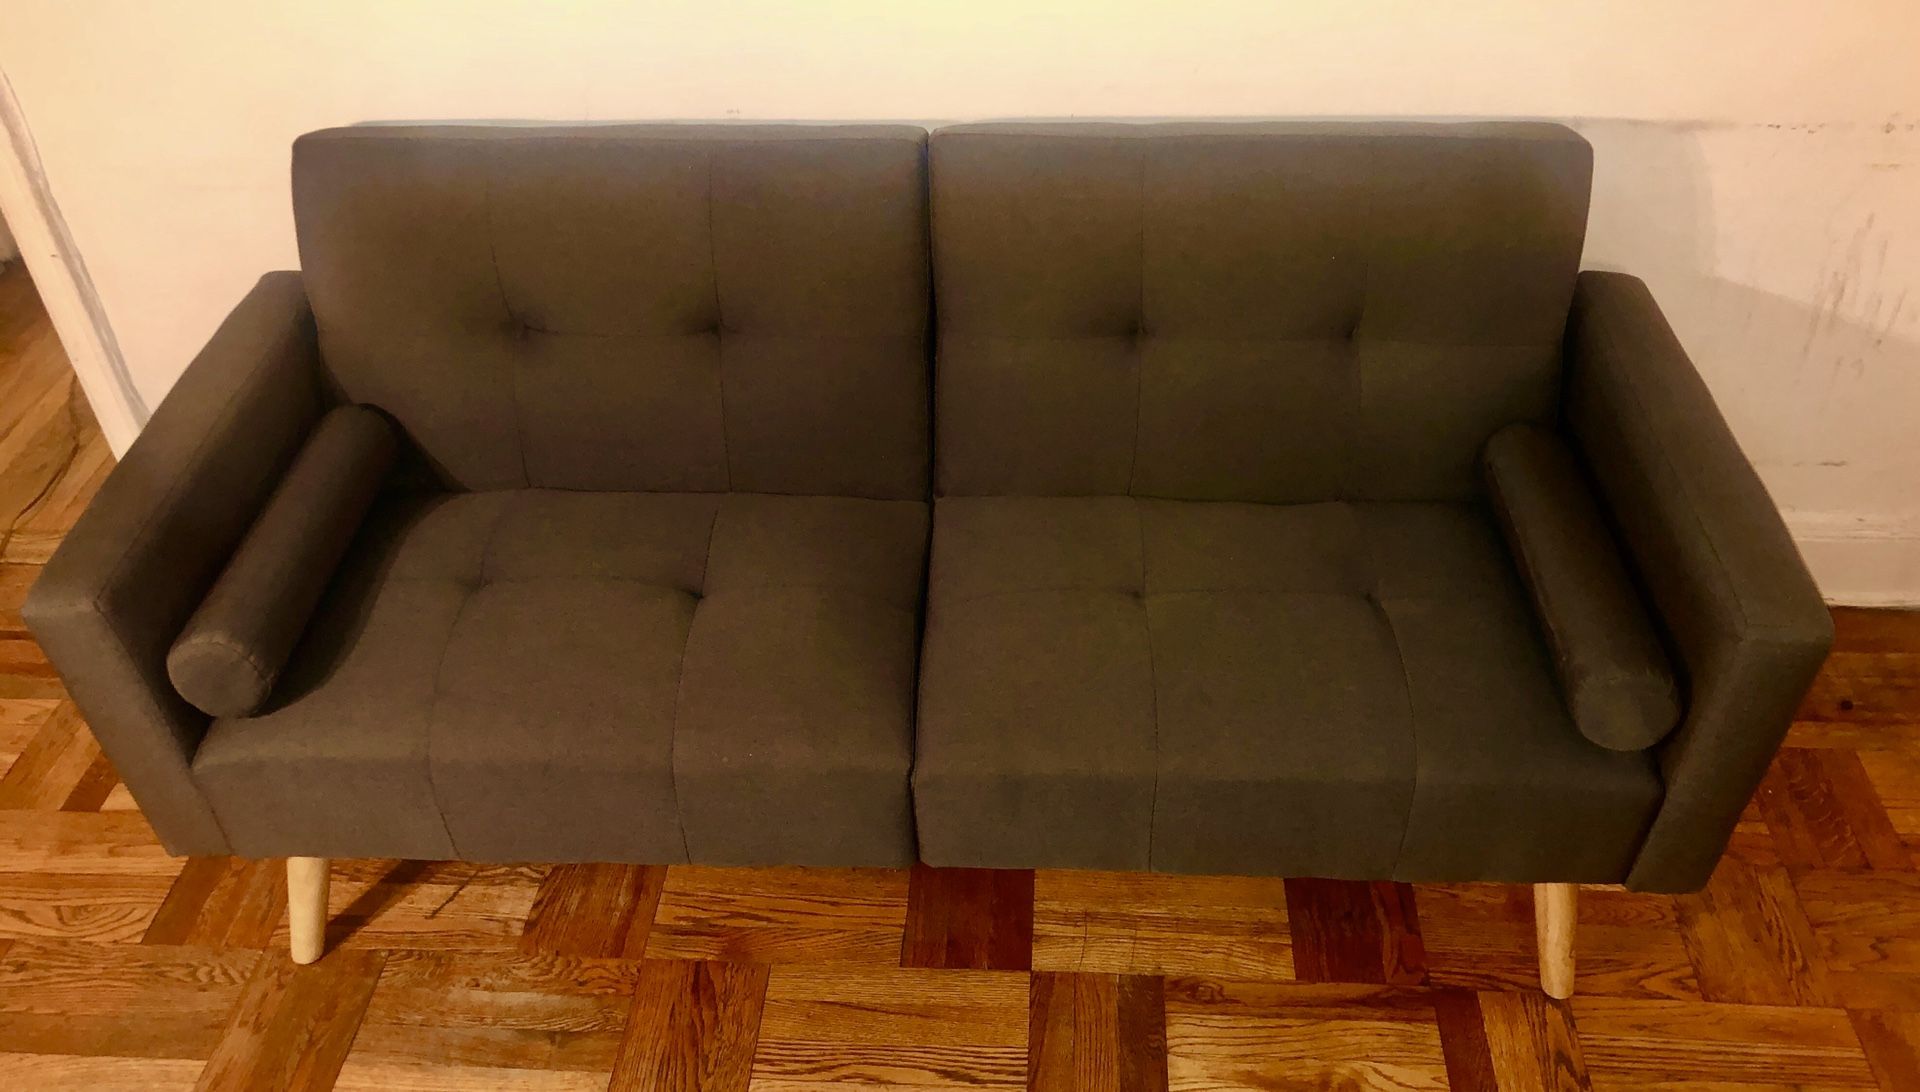 Brand new looking, modern sofa bed.